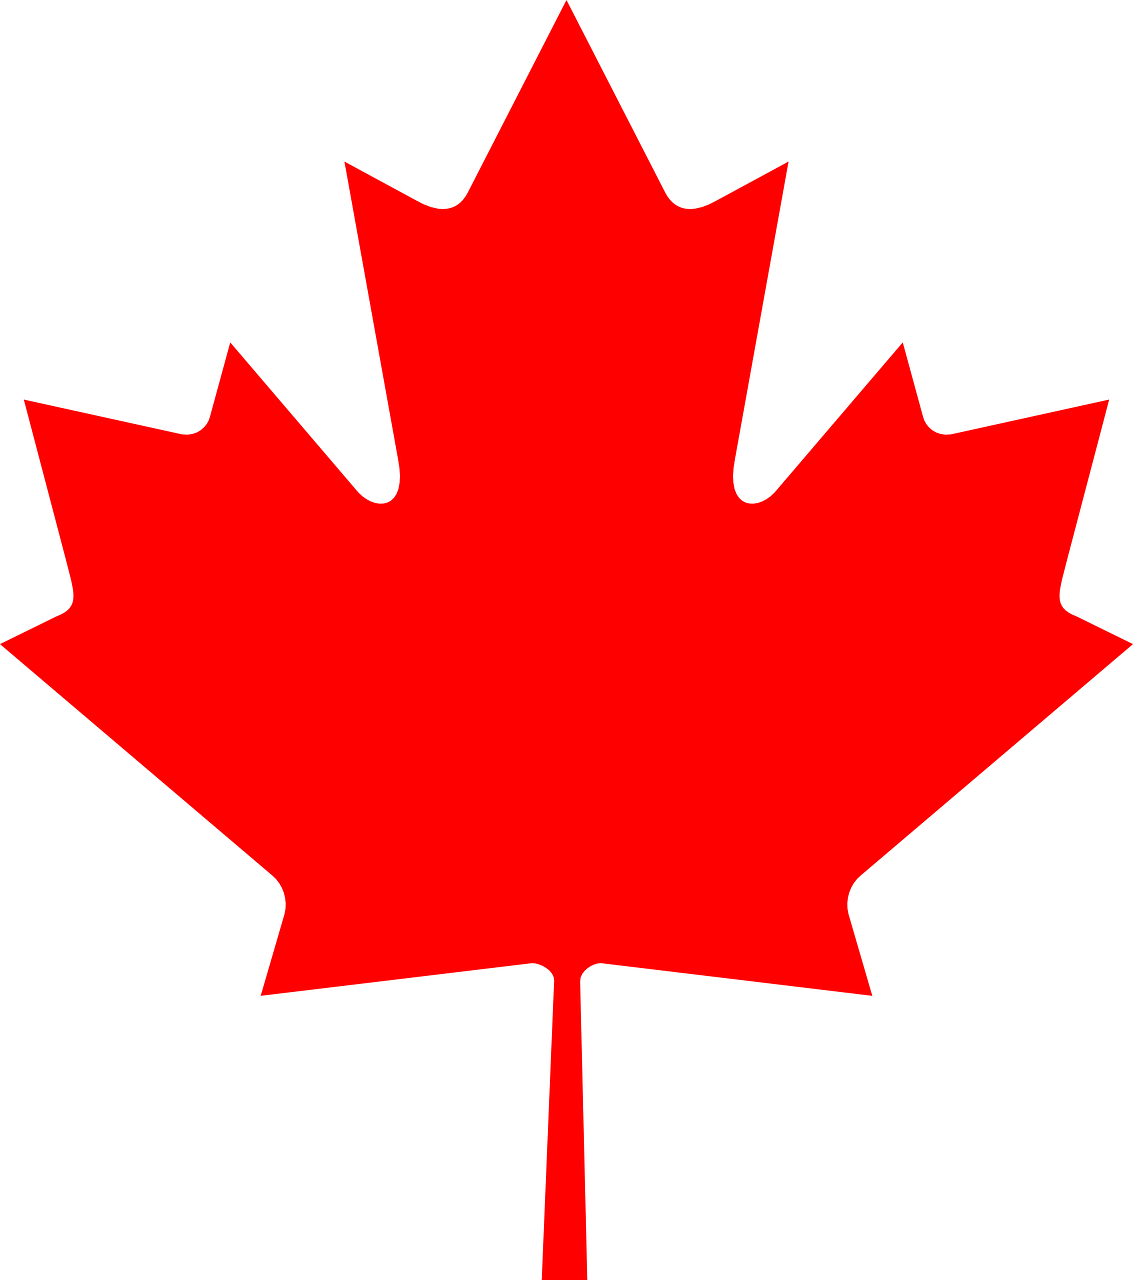 a red maple leaf on a black background, inspired by Masamitsu Ōta, hurufiyya, boards of canada album cover, vectorized, very very low quality, military insignia